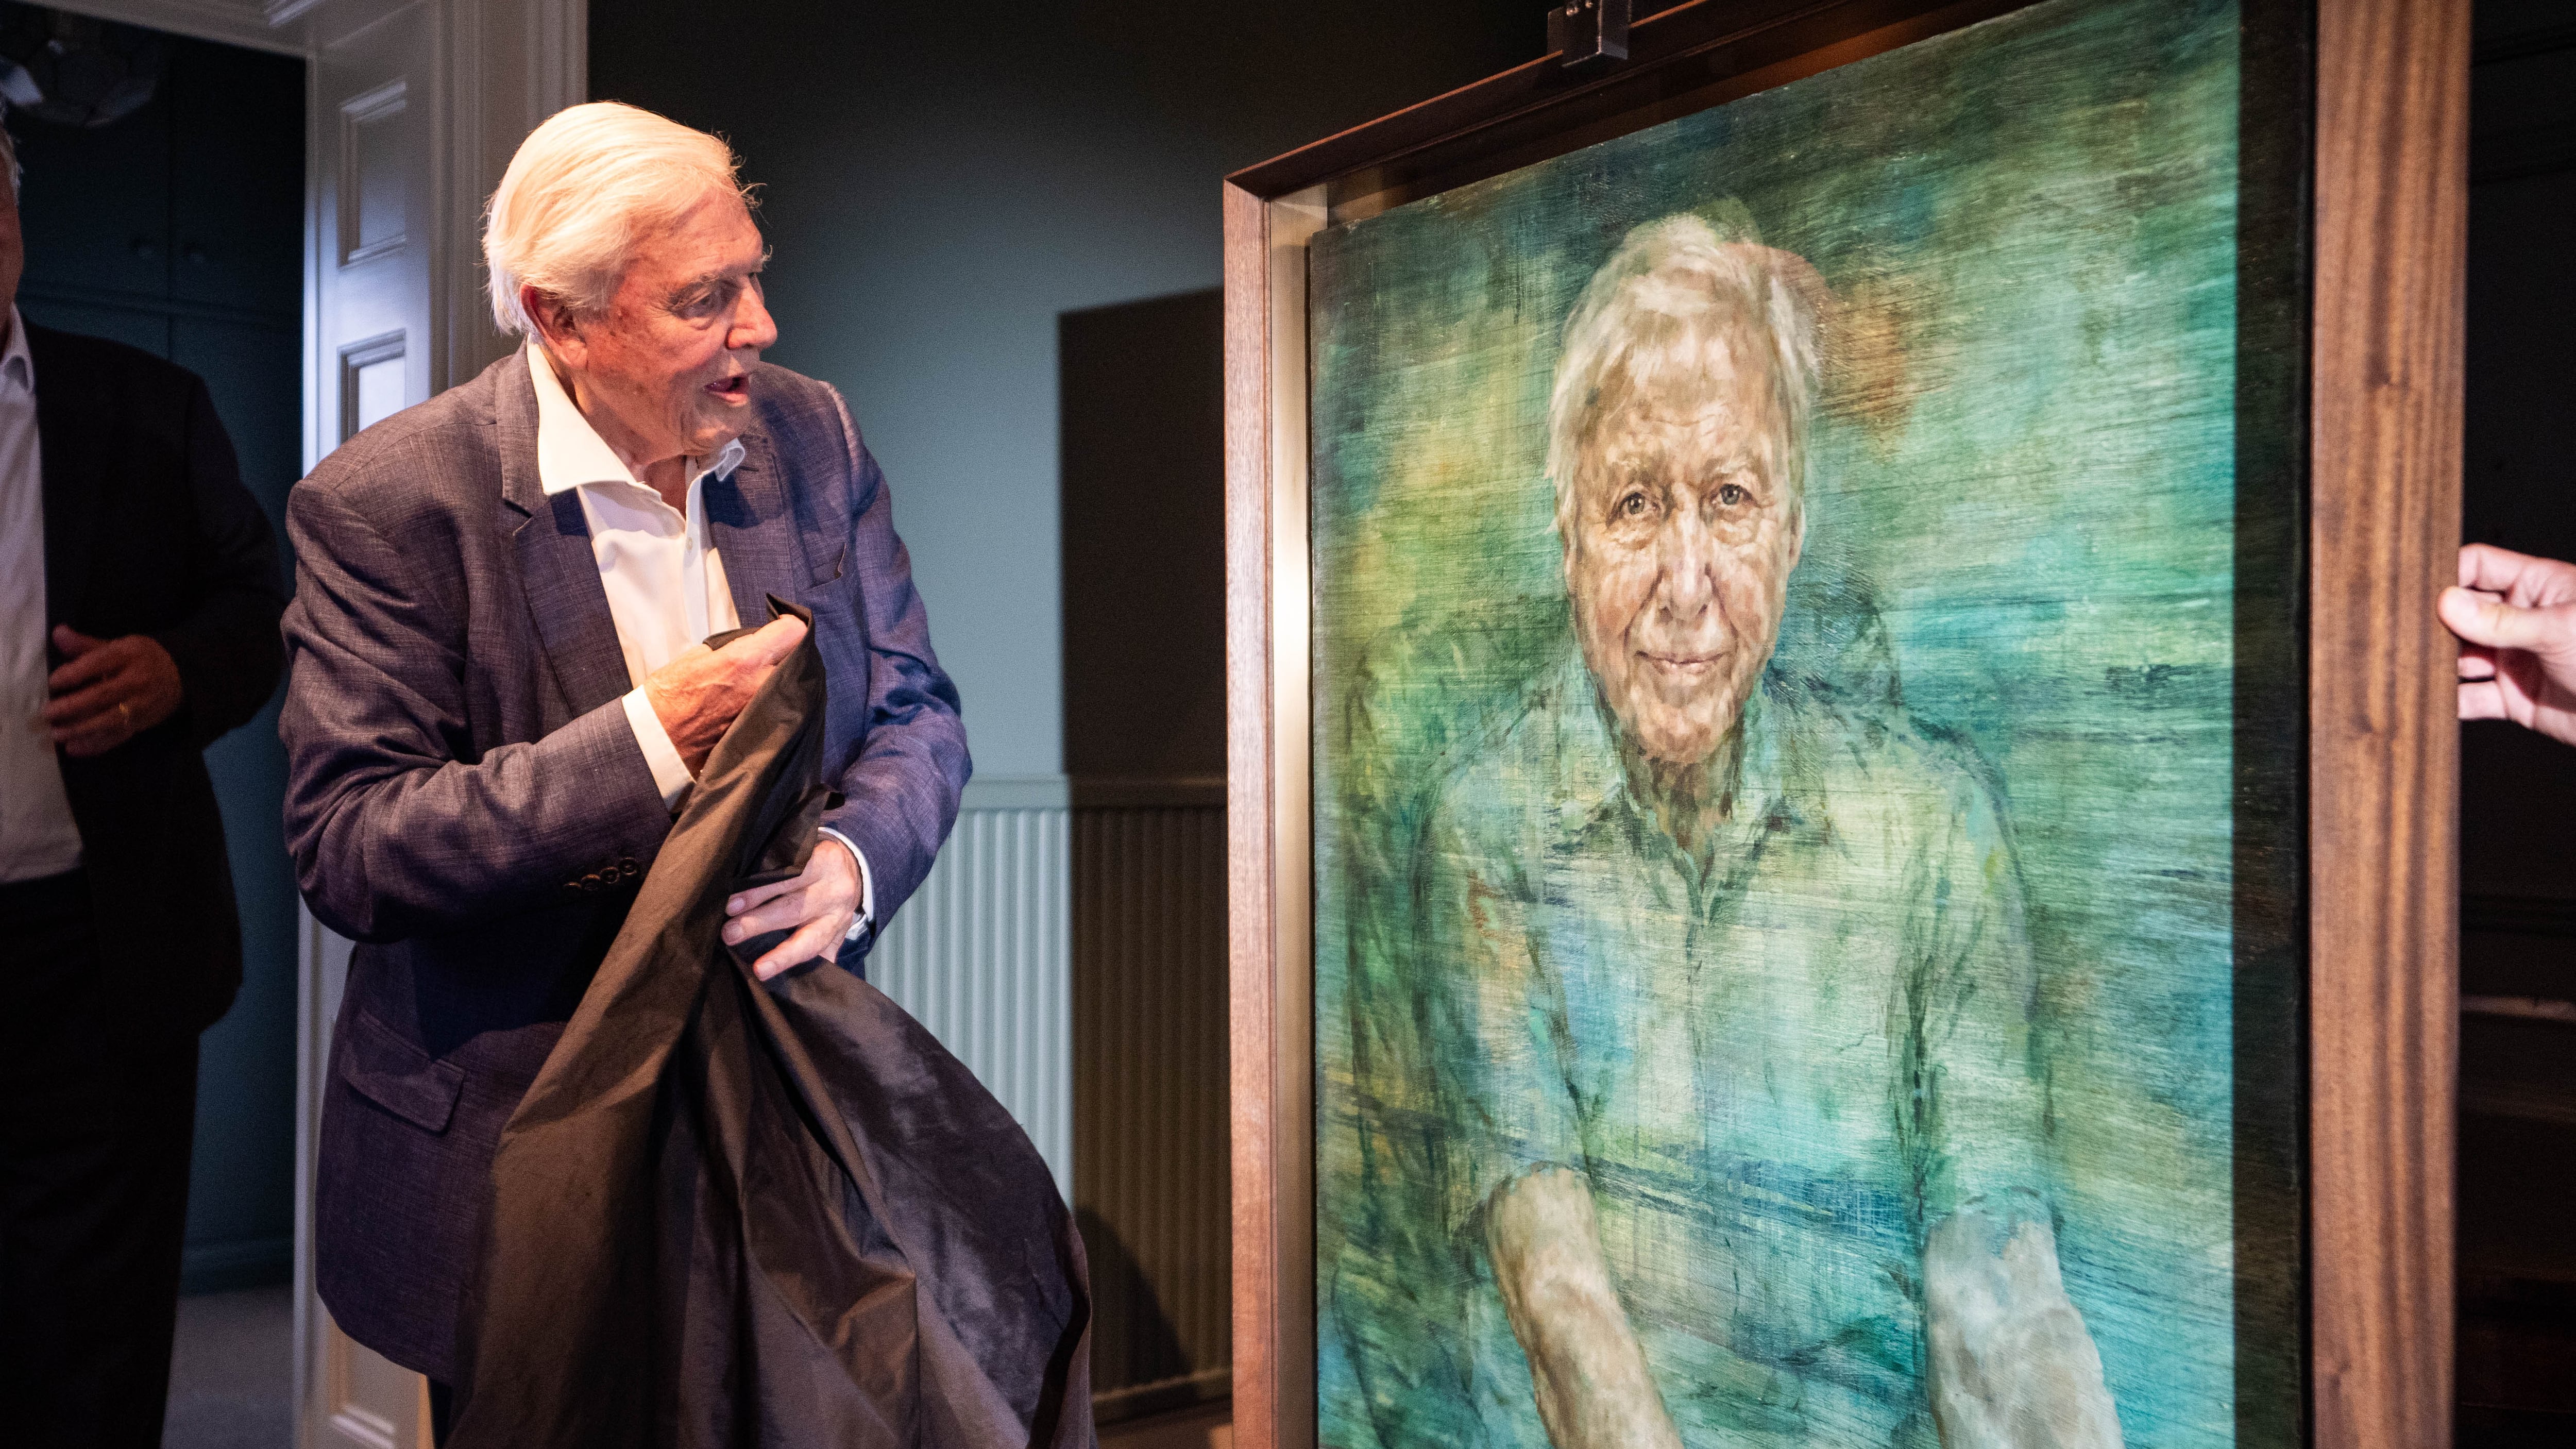 Sir David Attenborough during the unveiling of a portrait of the broadcaster and conservationist painted by Jonathan Yeo, at a private ceremony at the Royal Society in London